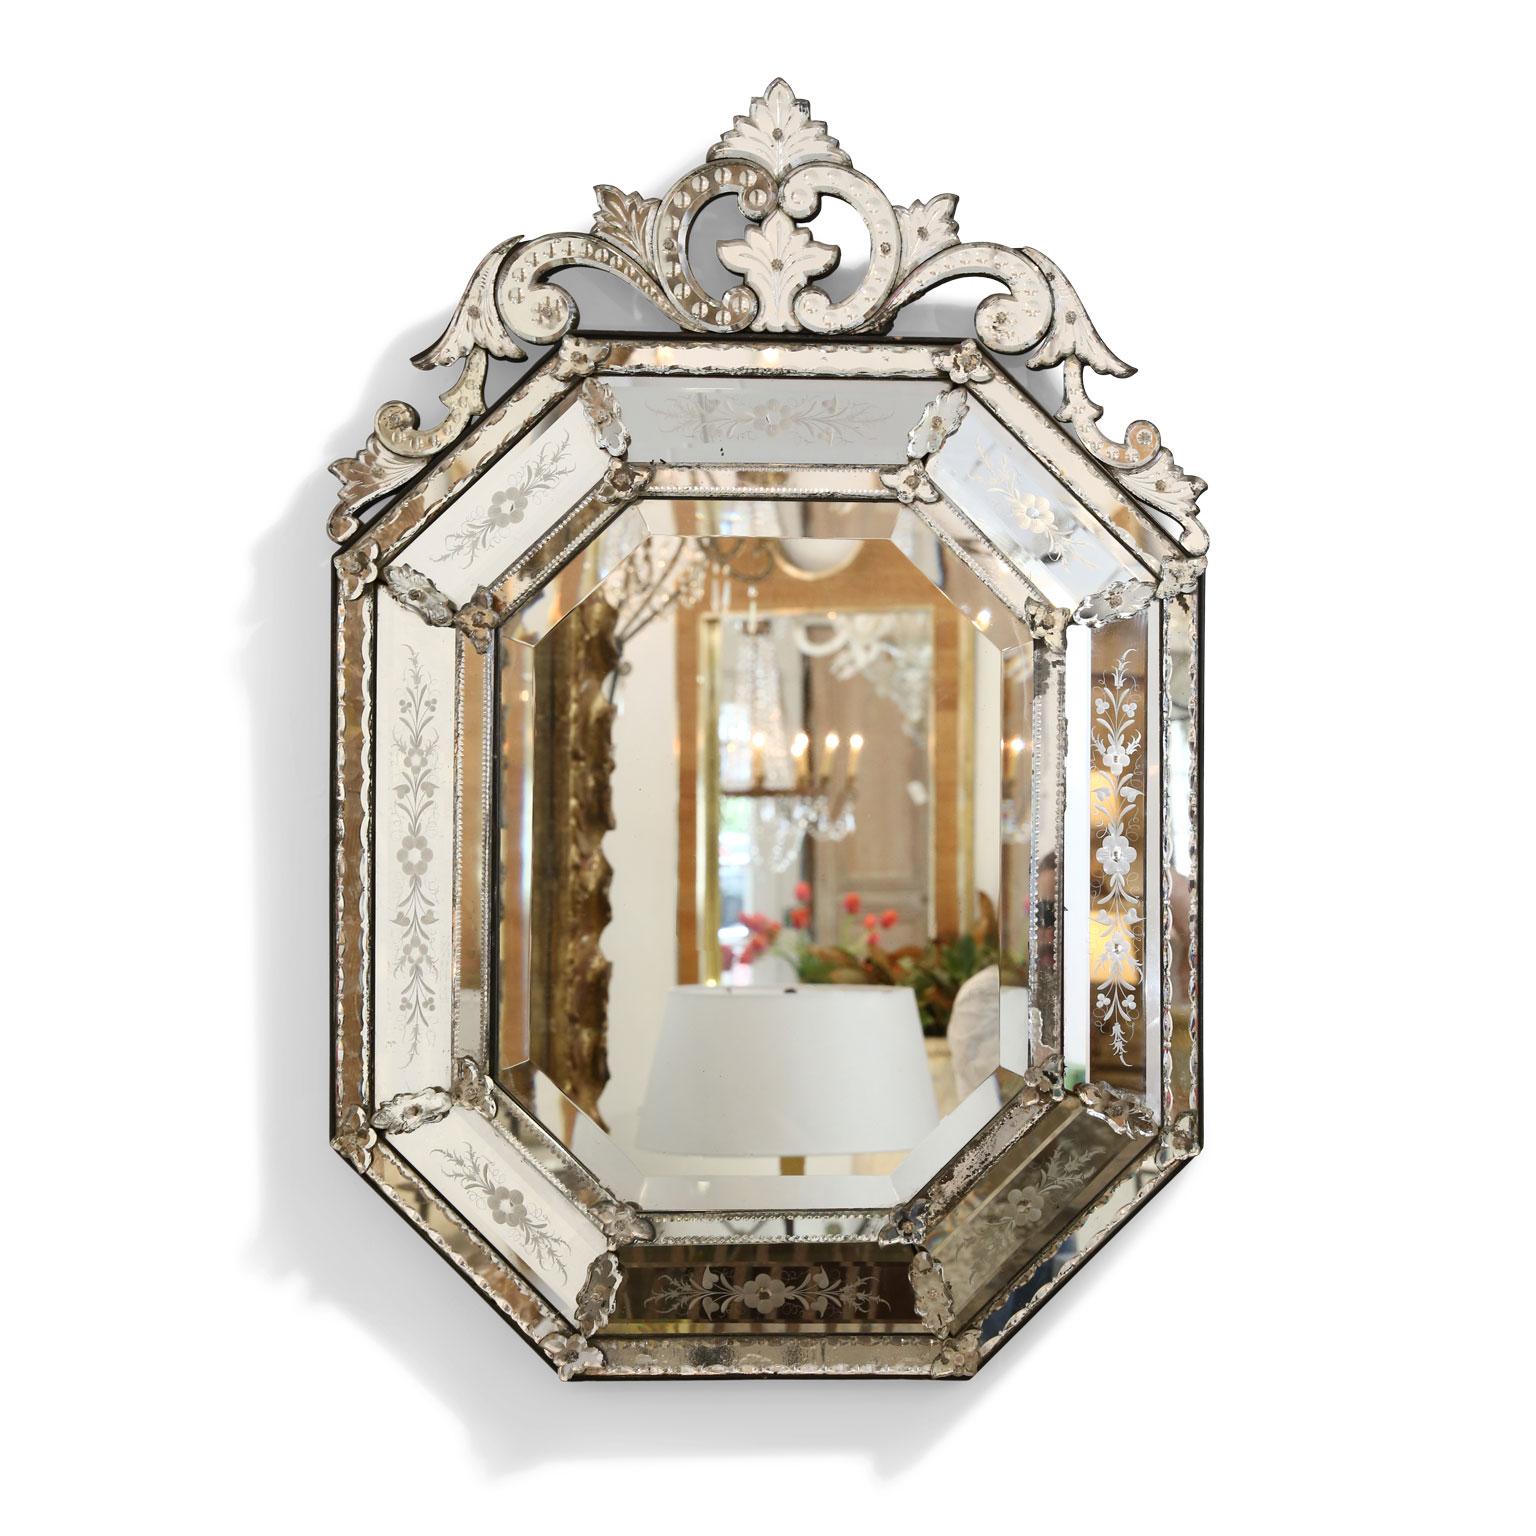 Octagonal Venetian mirror, (circa 1870-1880). Topped by elaborate openwork crest. Very good condition with only minor losses to its silvered mirror backing.